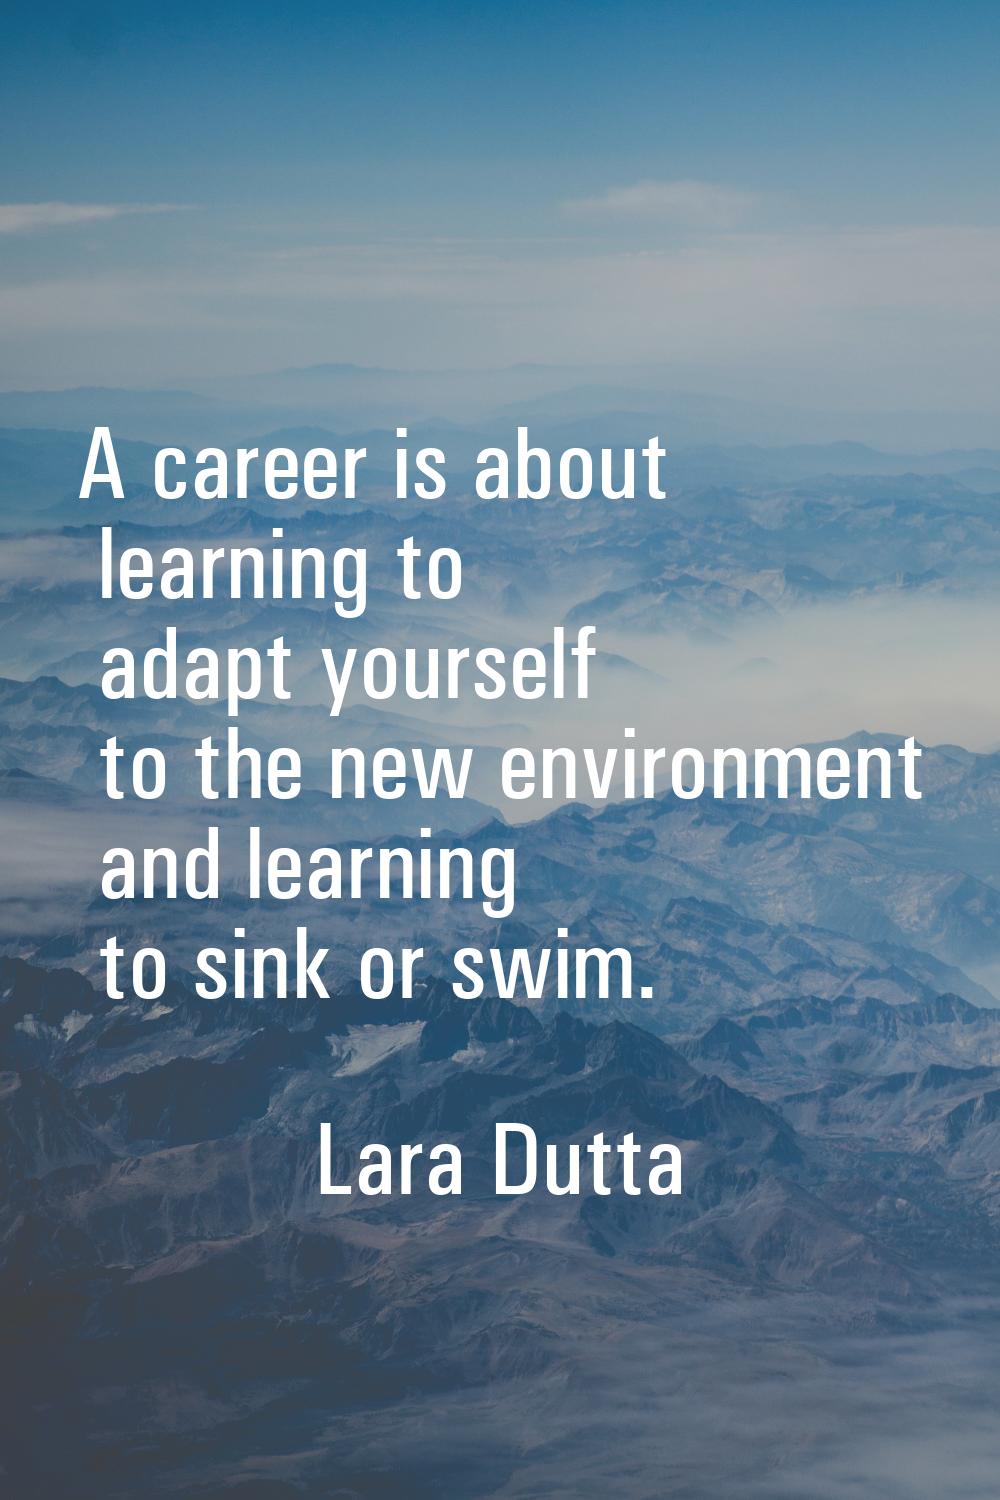 A career is about learning to adapt yourself to the new environment and learning to sink or swim.